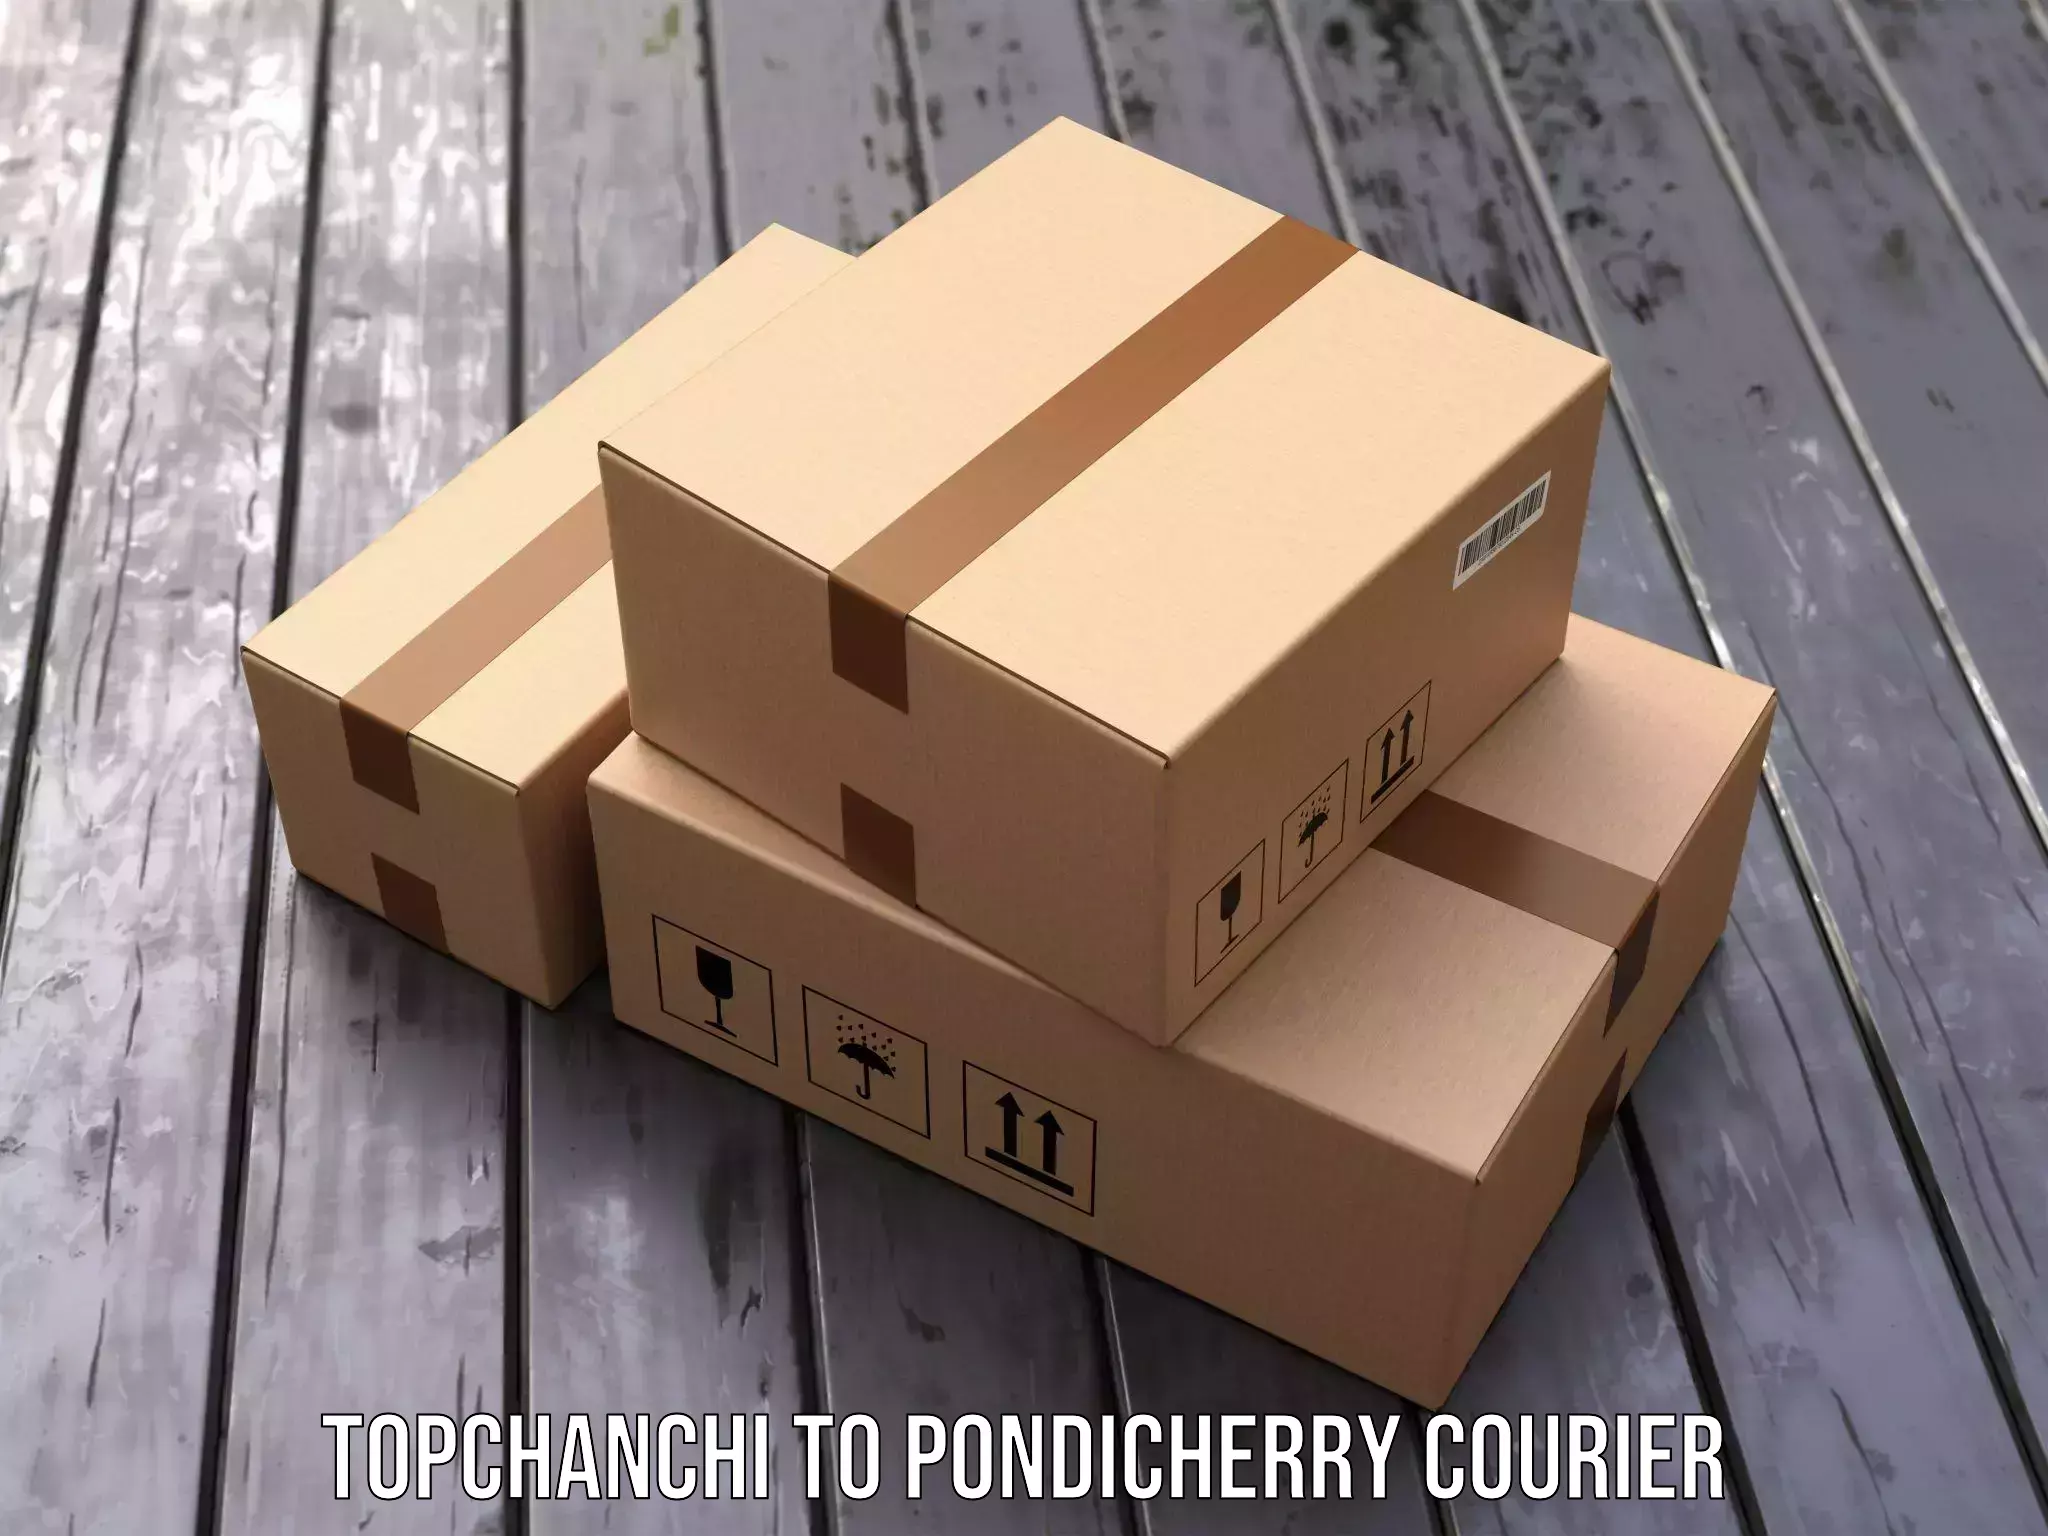 On-call courier service Topchanchi to Pondicherry